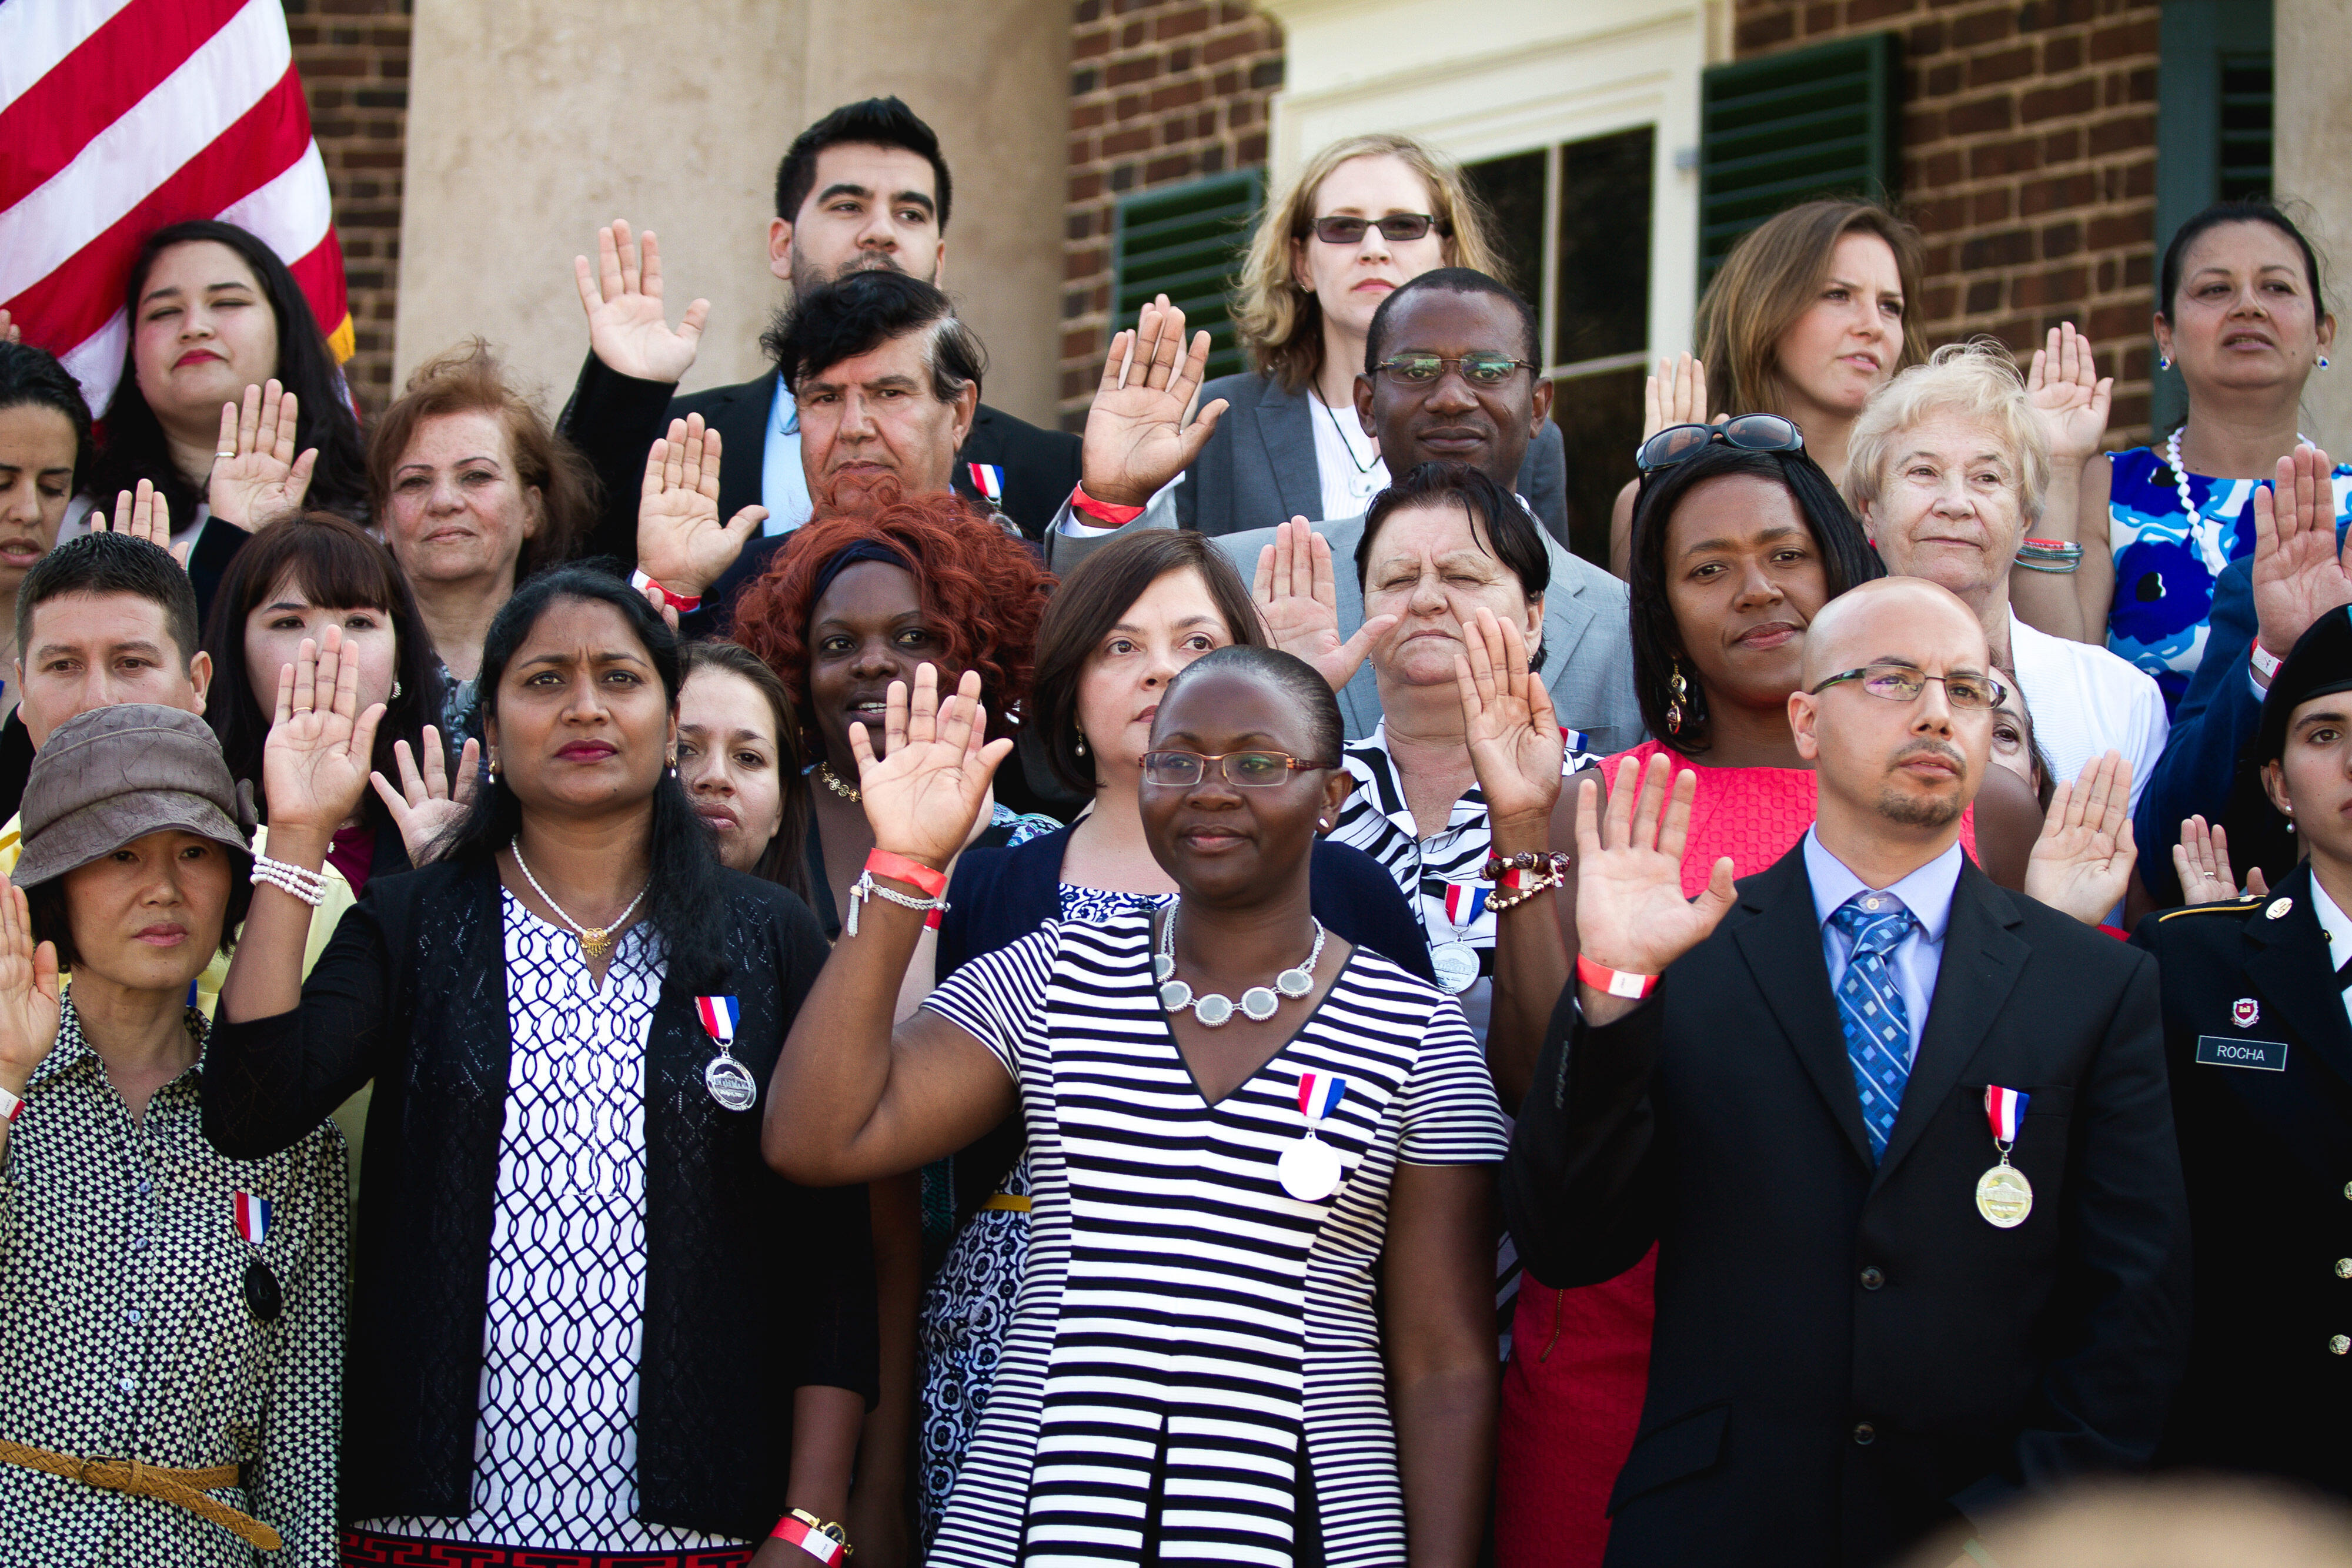 Group of people resettled in the U.S. stand together and raise their right hands as they are sworn in as citizens.